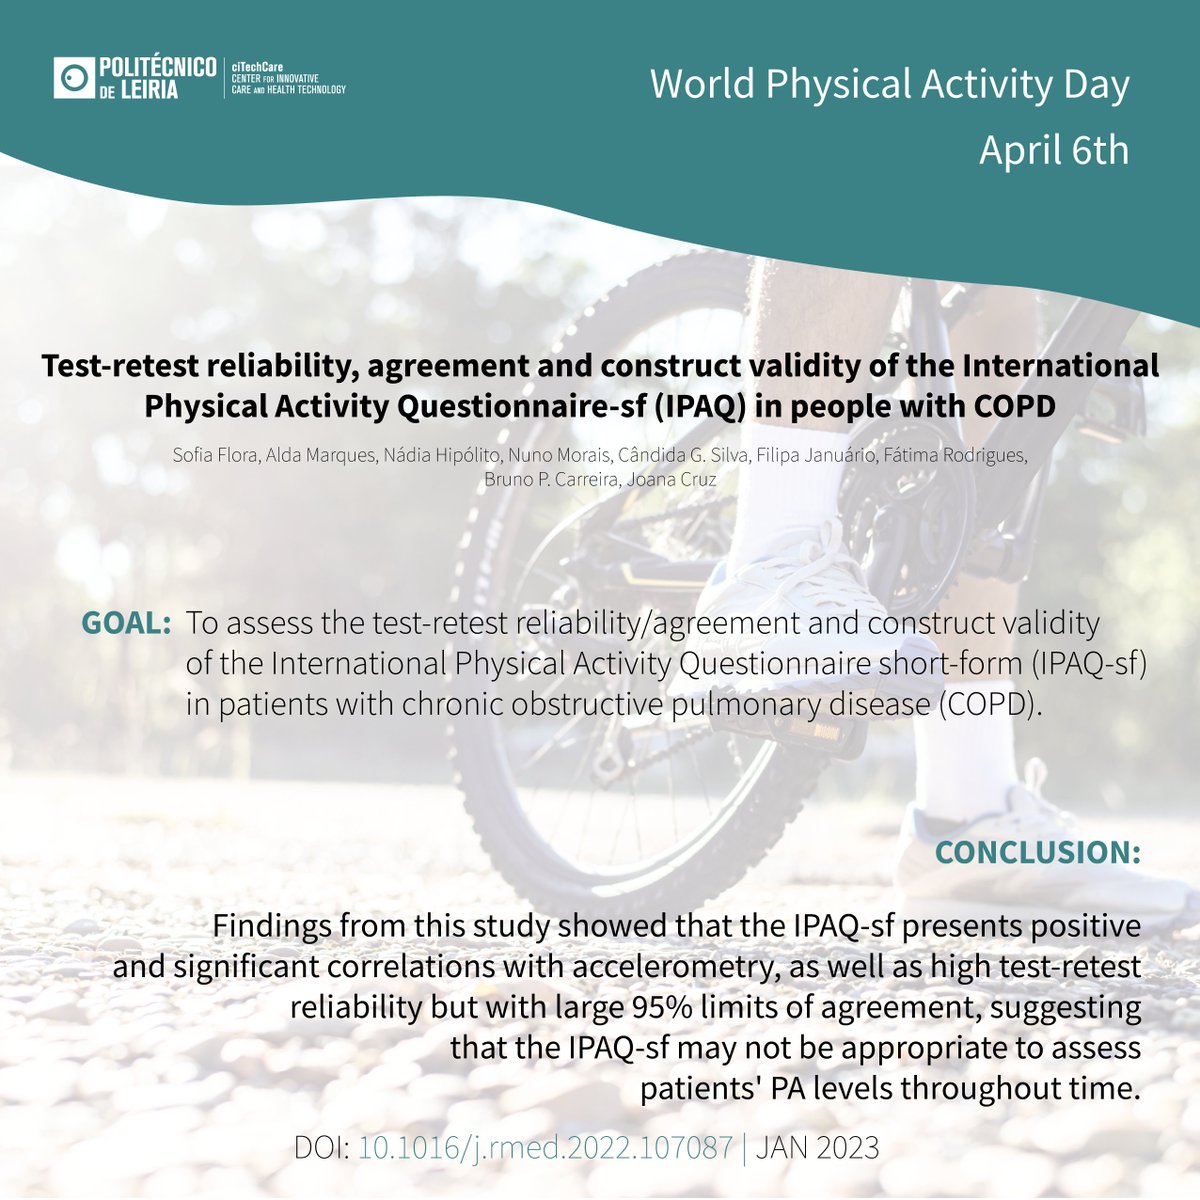 • WHAT DOES SCIENCE TELL US ABOUT THE PRACTICE OF PHYSICAL ACTIVITY? •
On April 6th, the day that celebrates #WorldPhysicalActivityDay, ciTechCare brings together some of the most recent studies on the practice of physical activity in clinical populations.